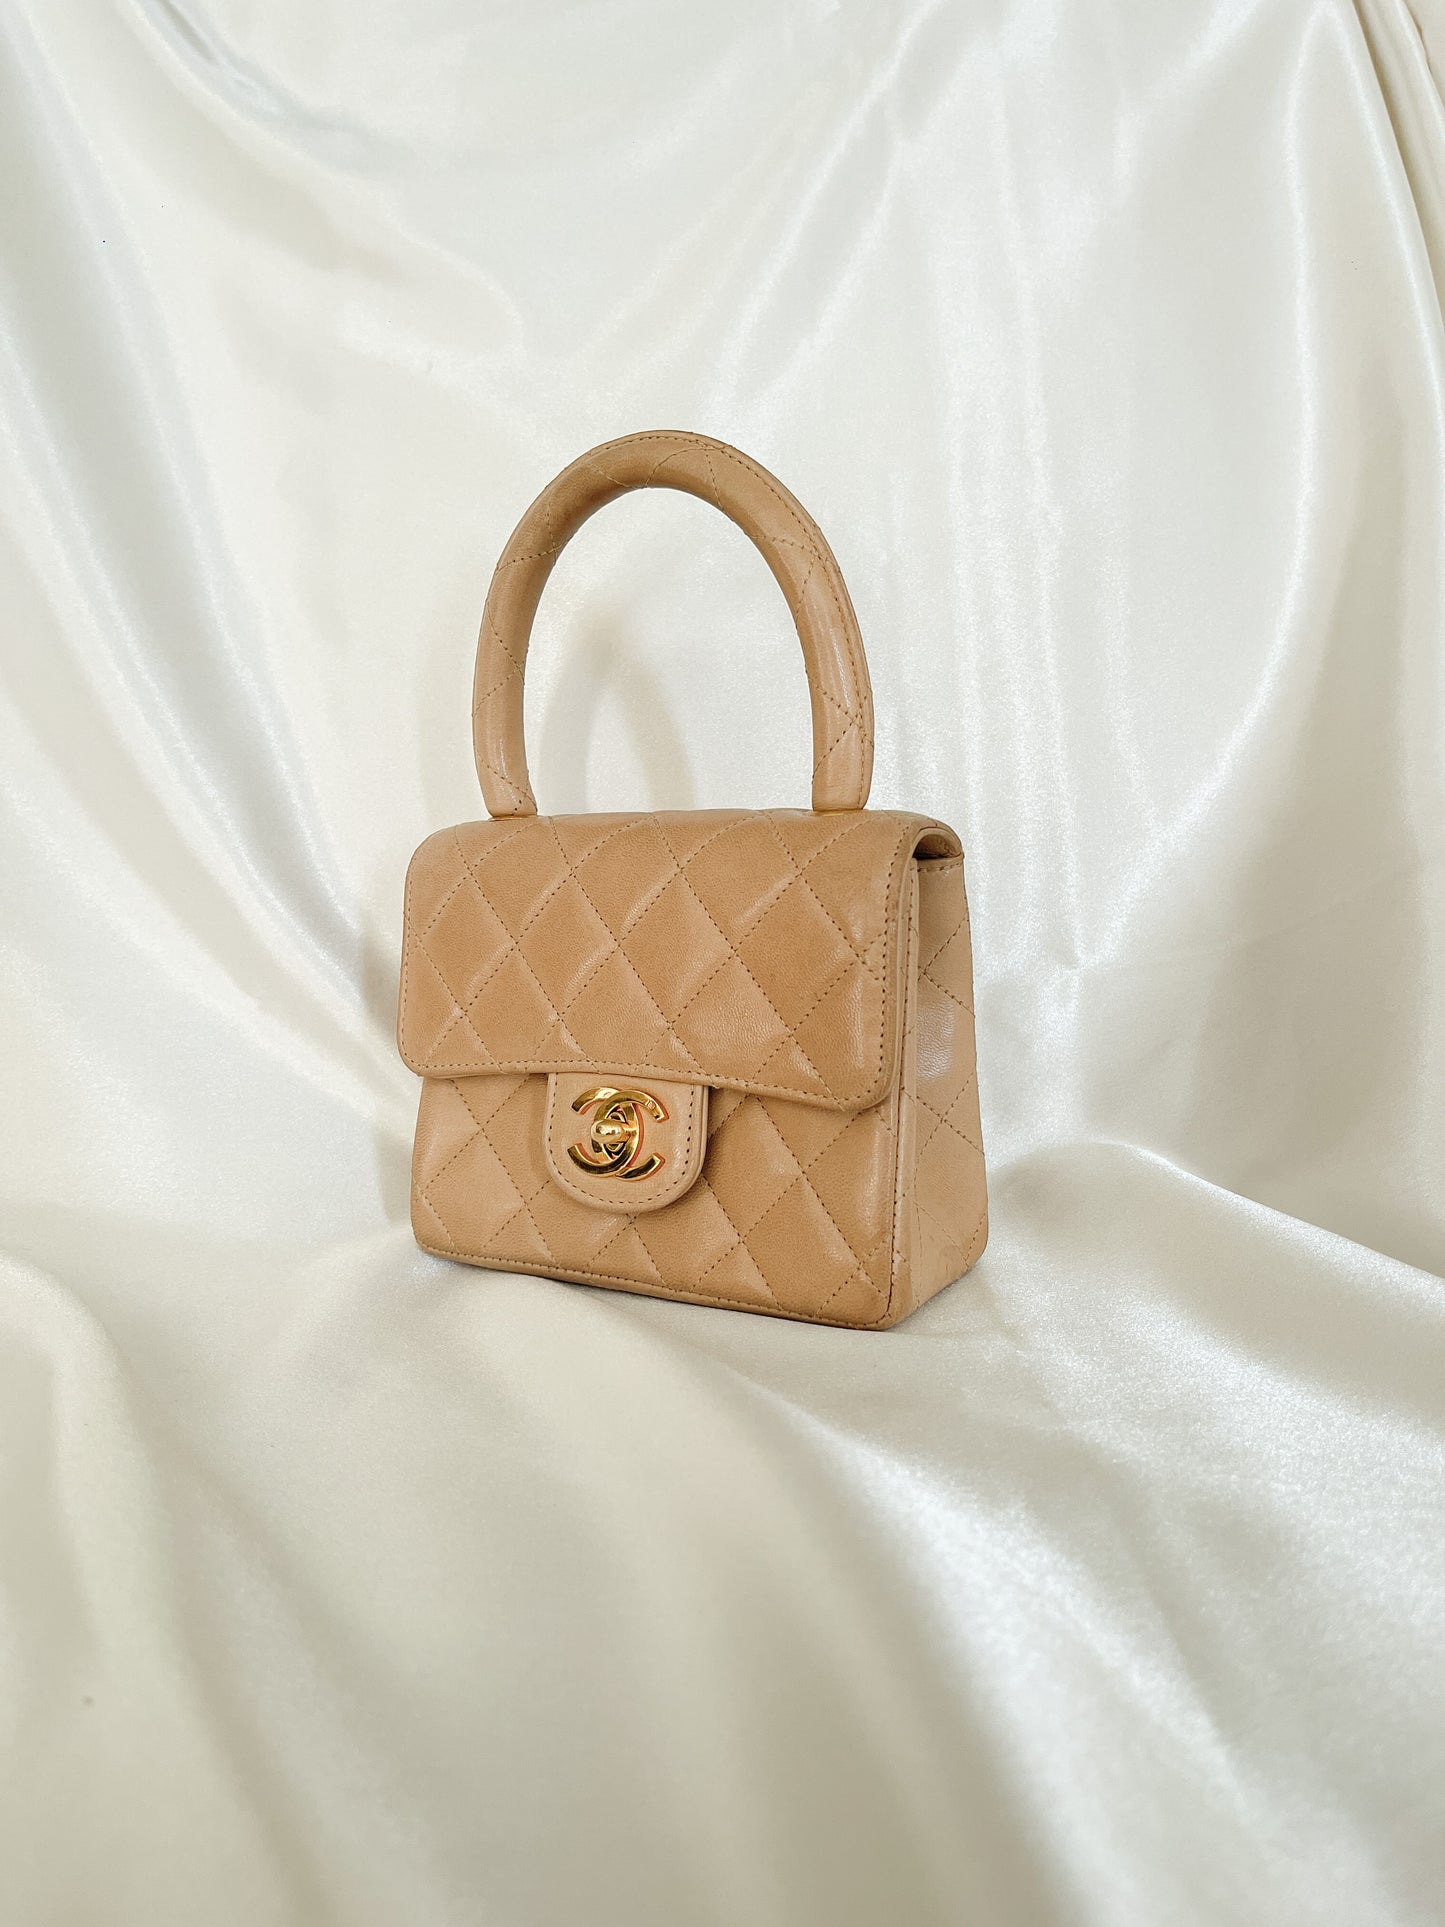 CHANEL CC LOGO TURN LOCK MICRO MINI KELLY TOP HANDLE BROWN QUILTED